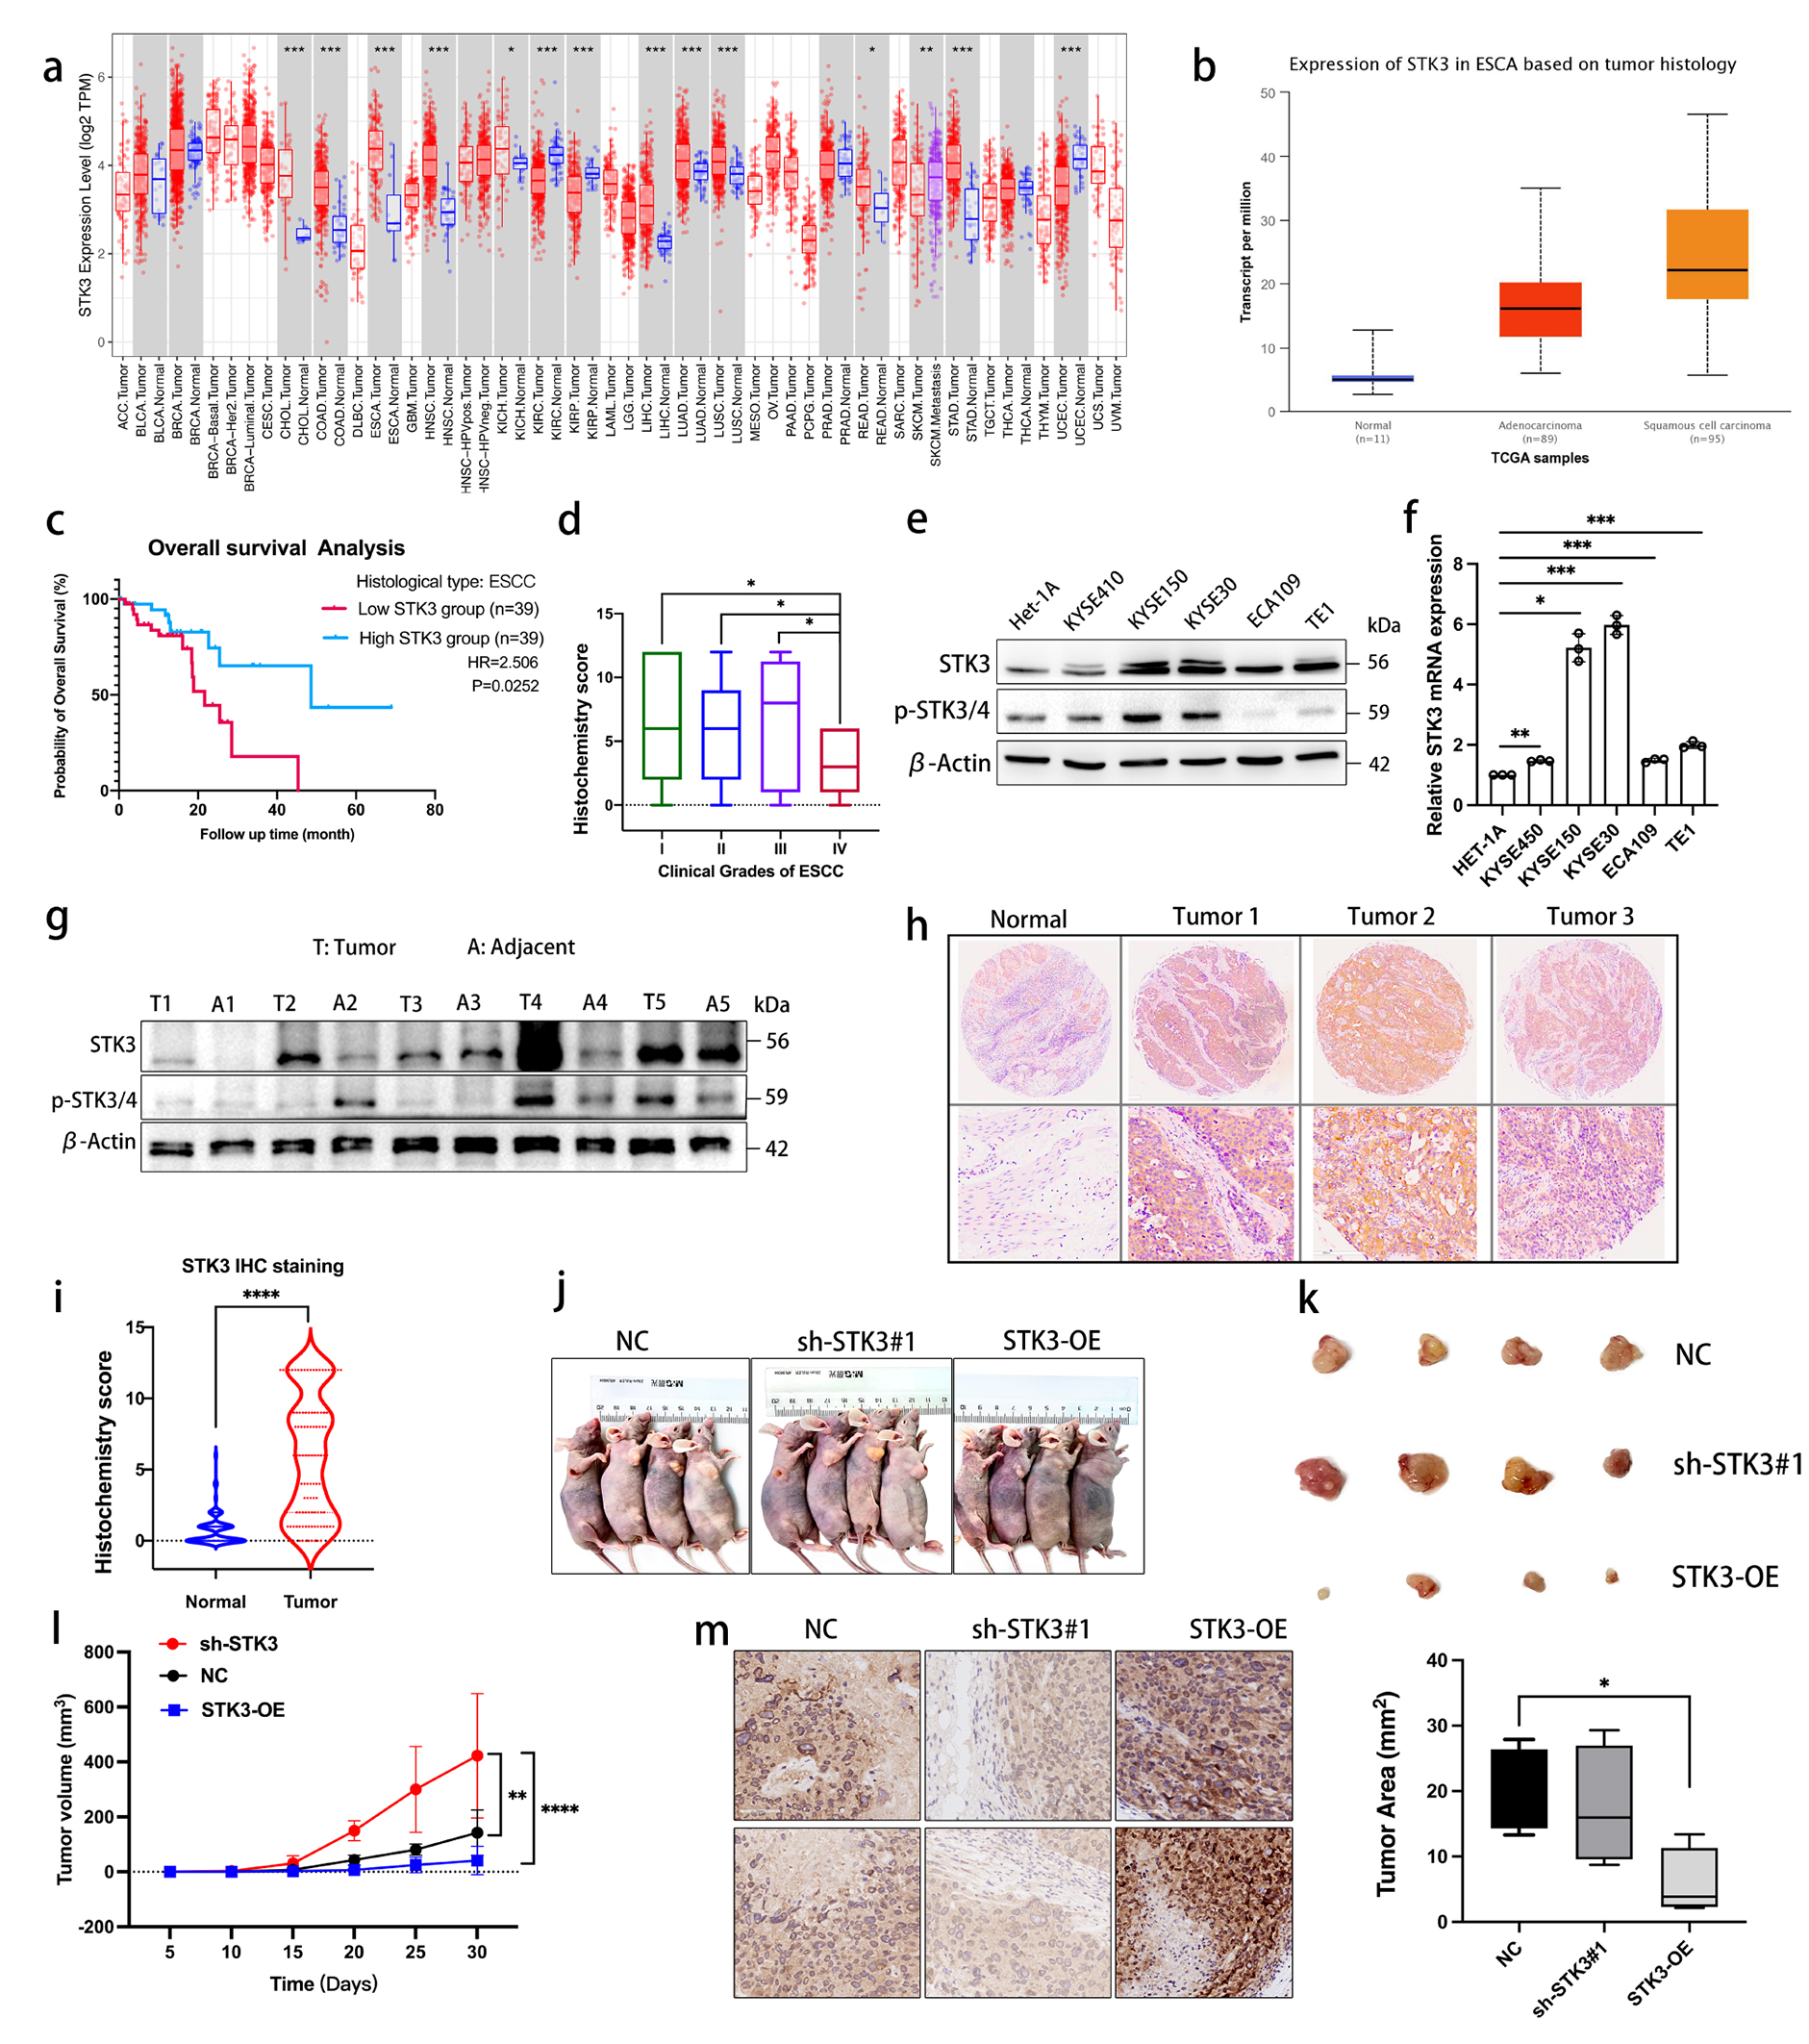 STK3 kinase activation inhibits tumor proliferation through FOXO1-TP53INP1/P21 pathway in esophageal squamous cell carcinoma